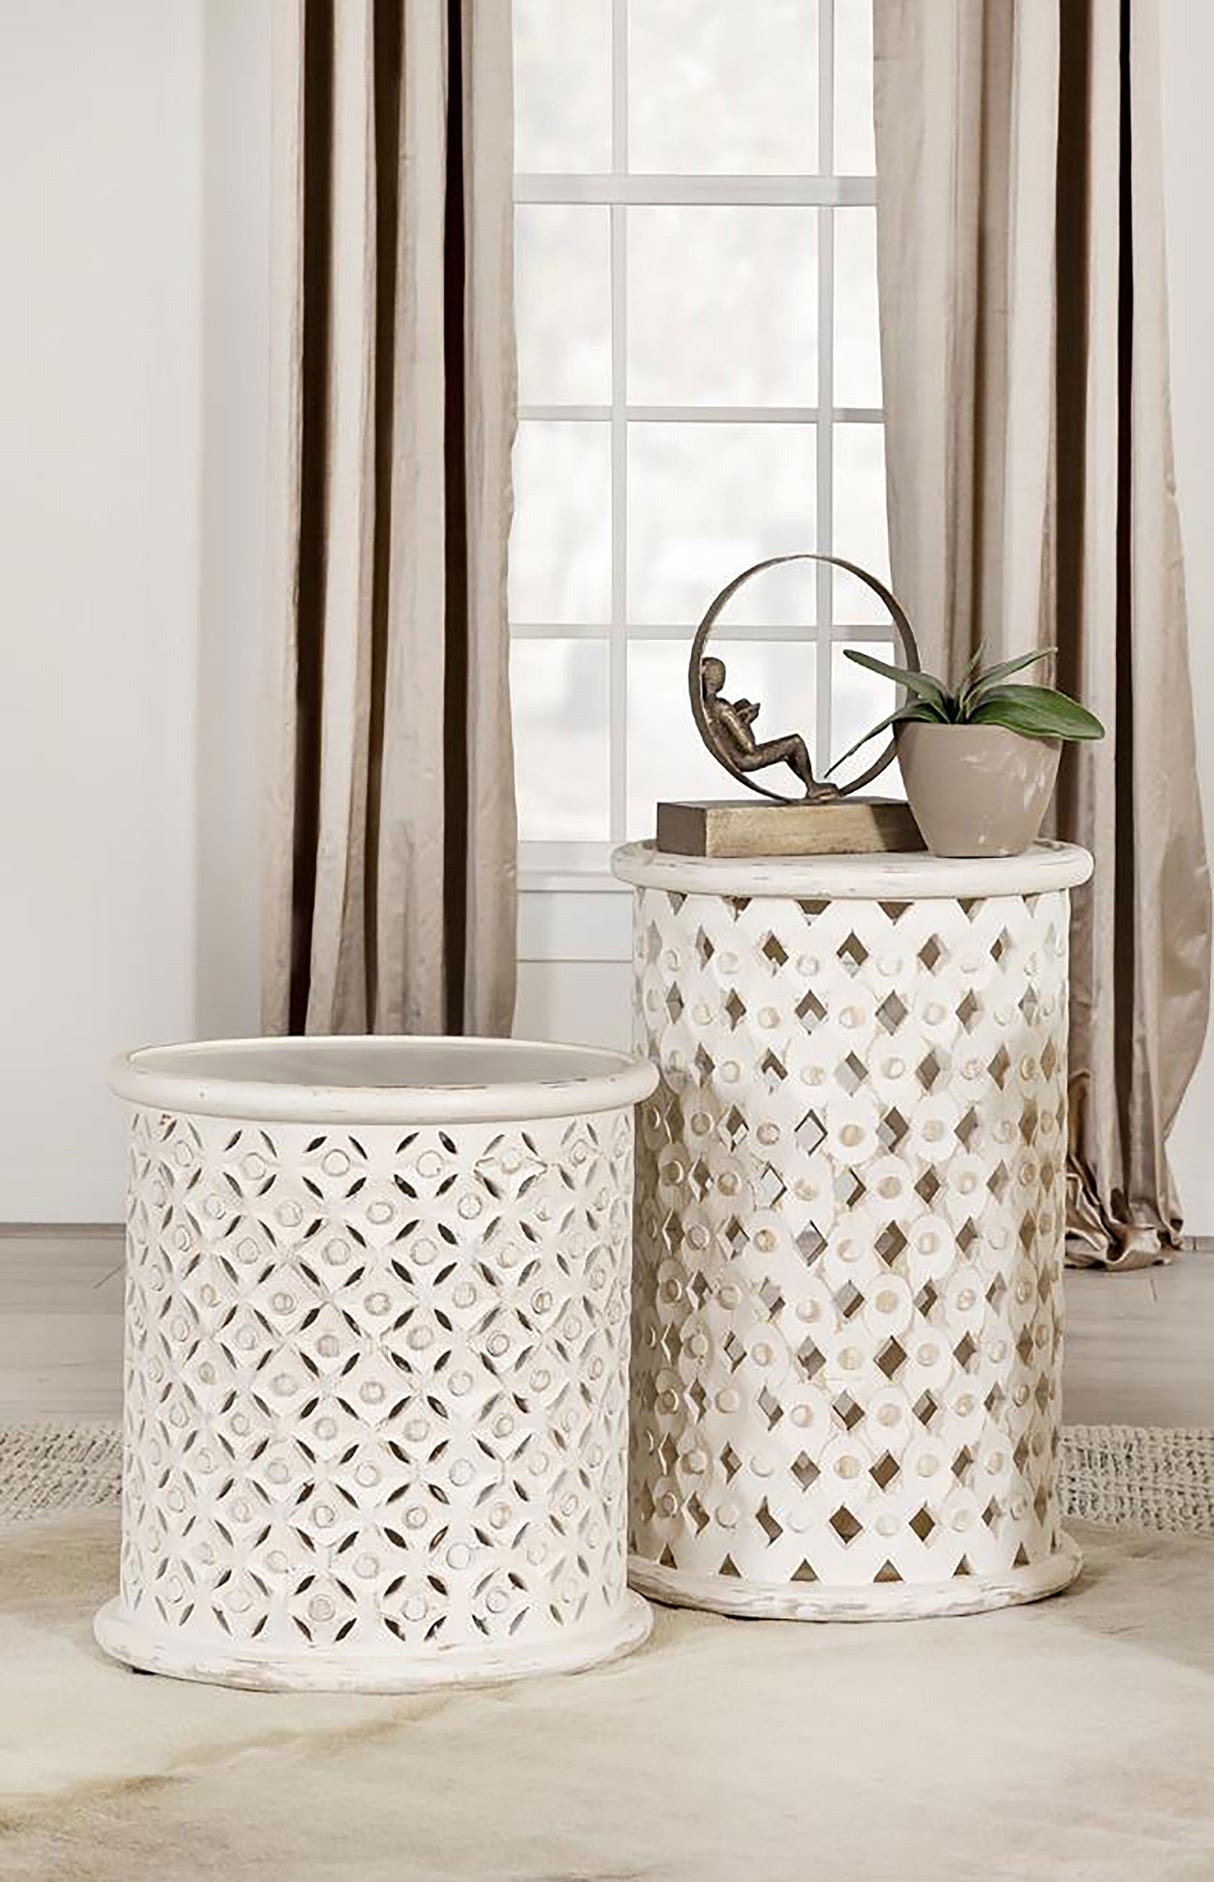 Side Table - Krish 24-inch Round Accent Table White Washed